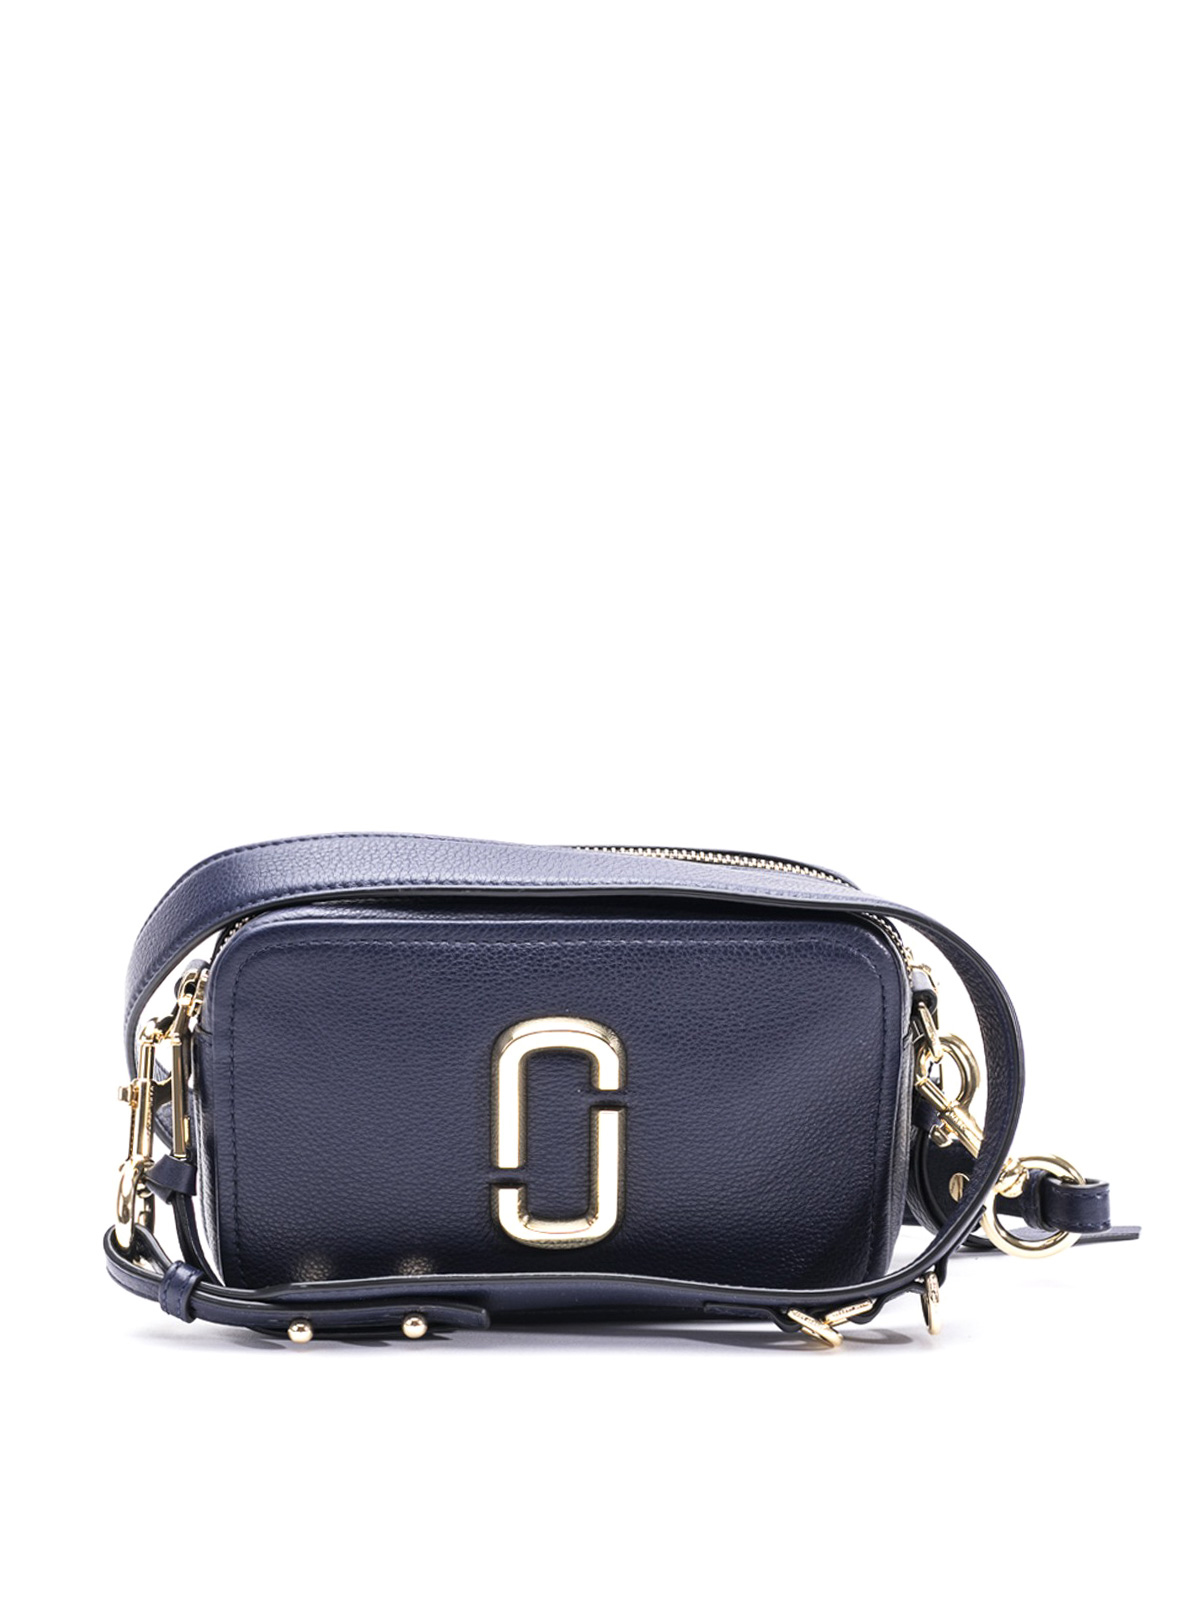 MARC JACOBS The Softshot 21 Leather Crossbody